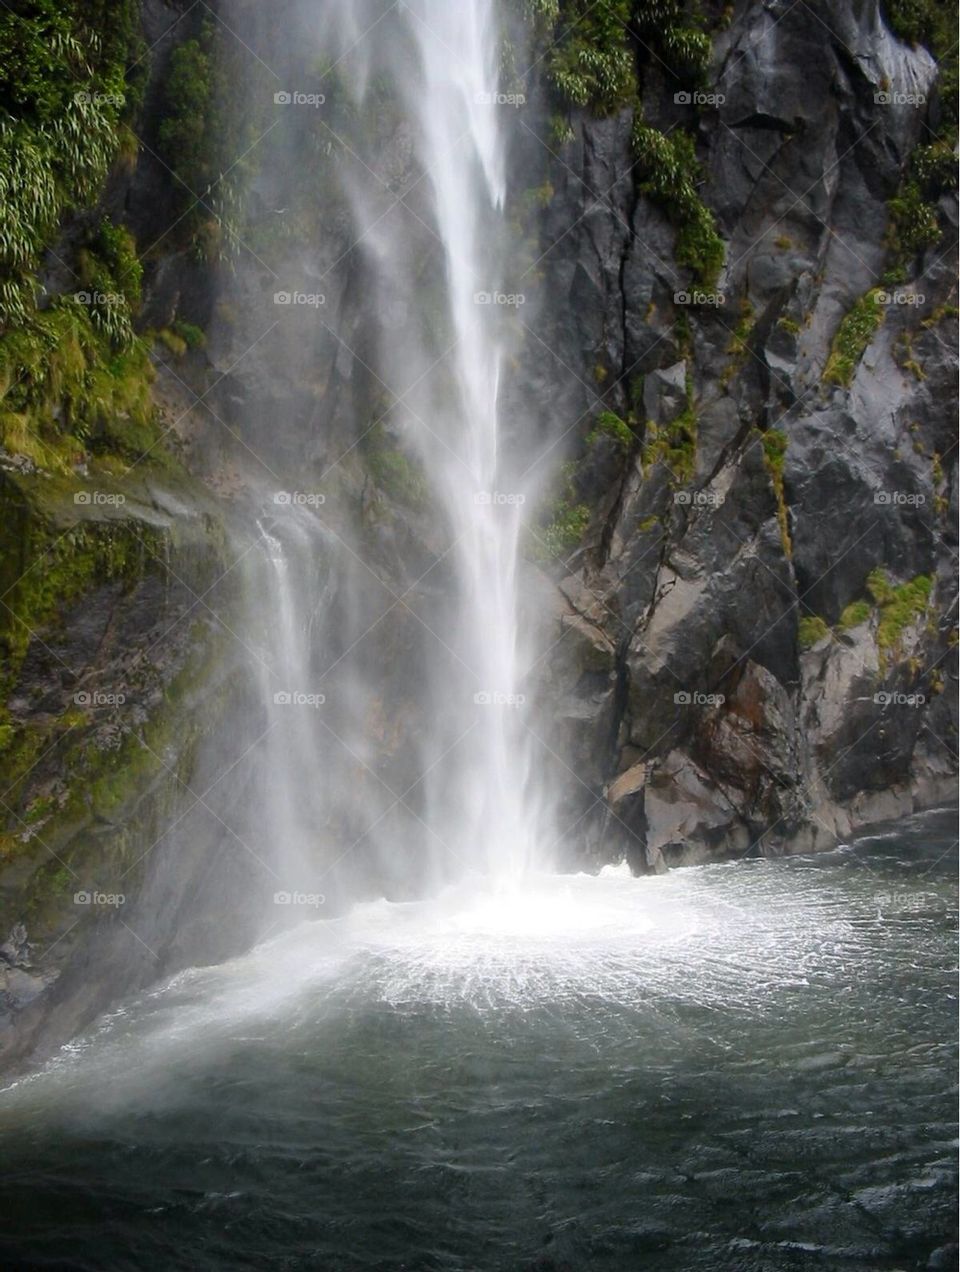 Waterfall and the Movement of Water in New Zealand